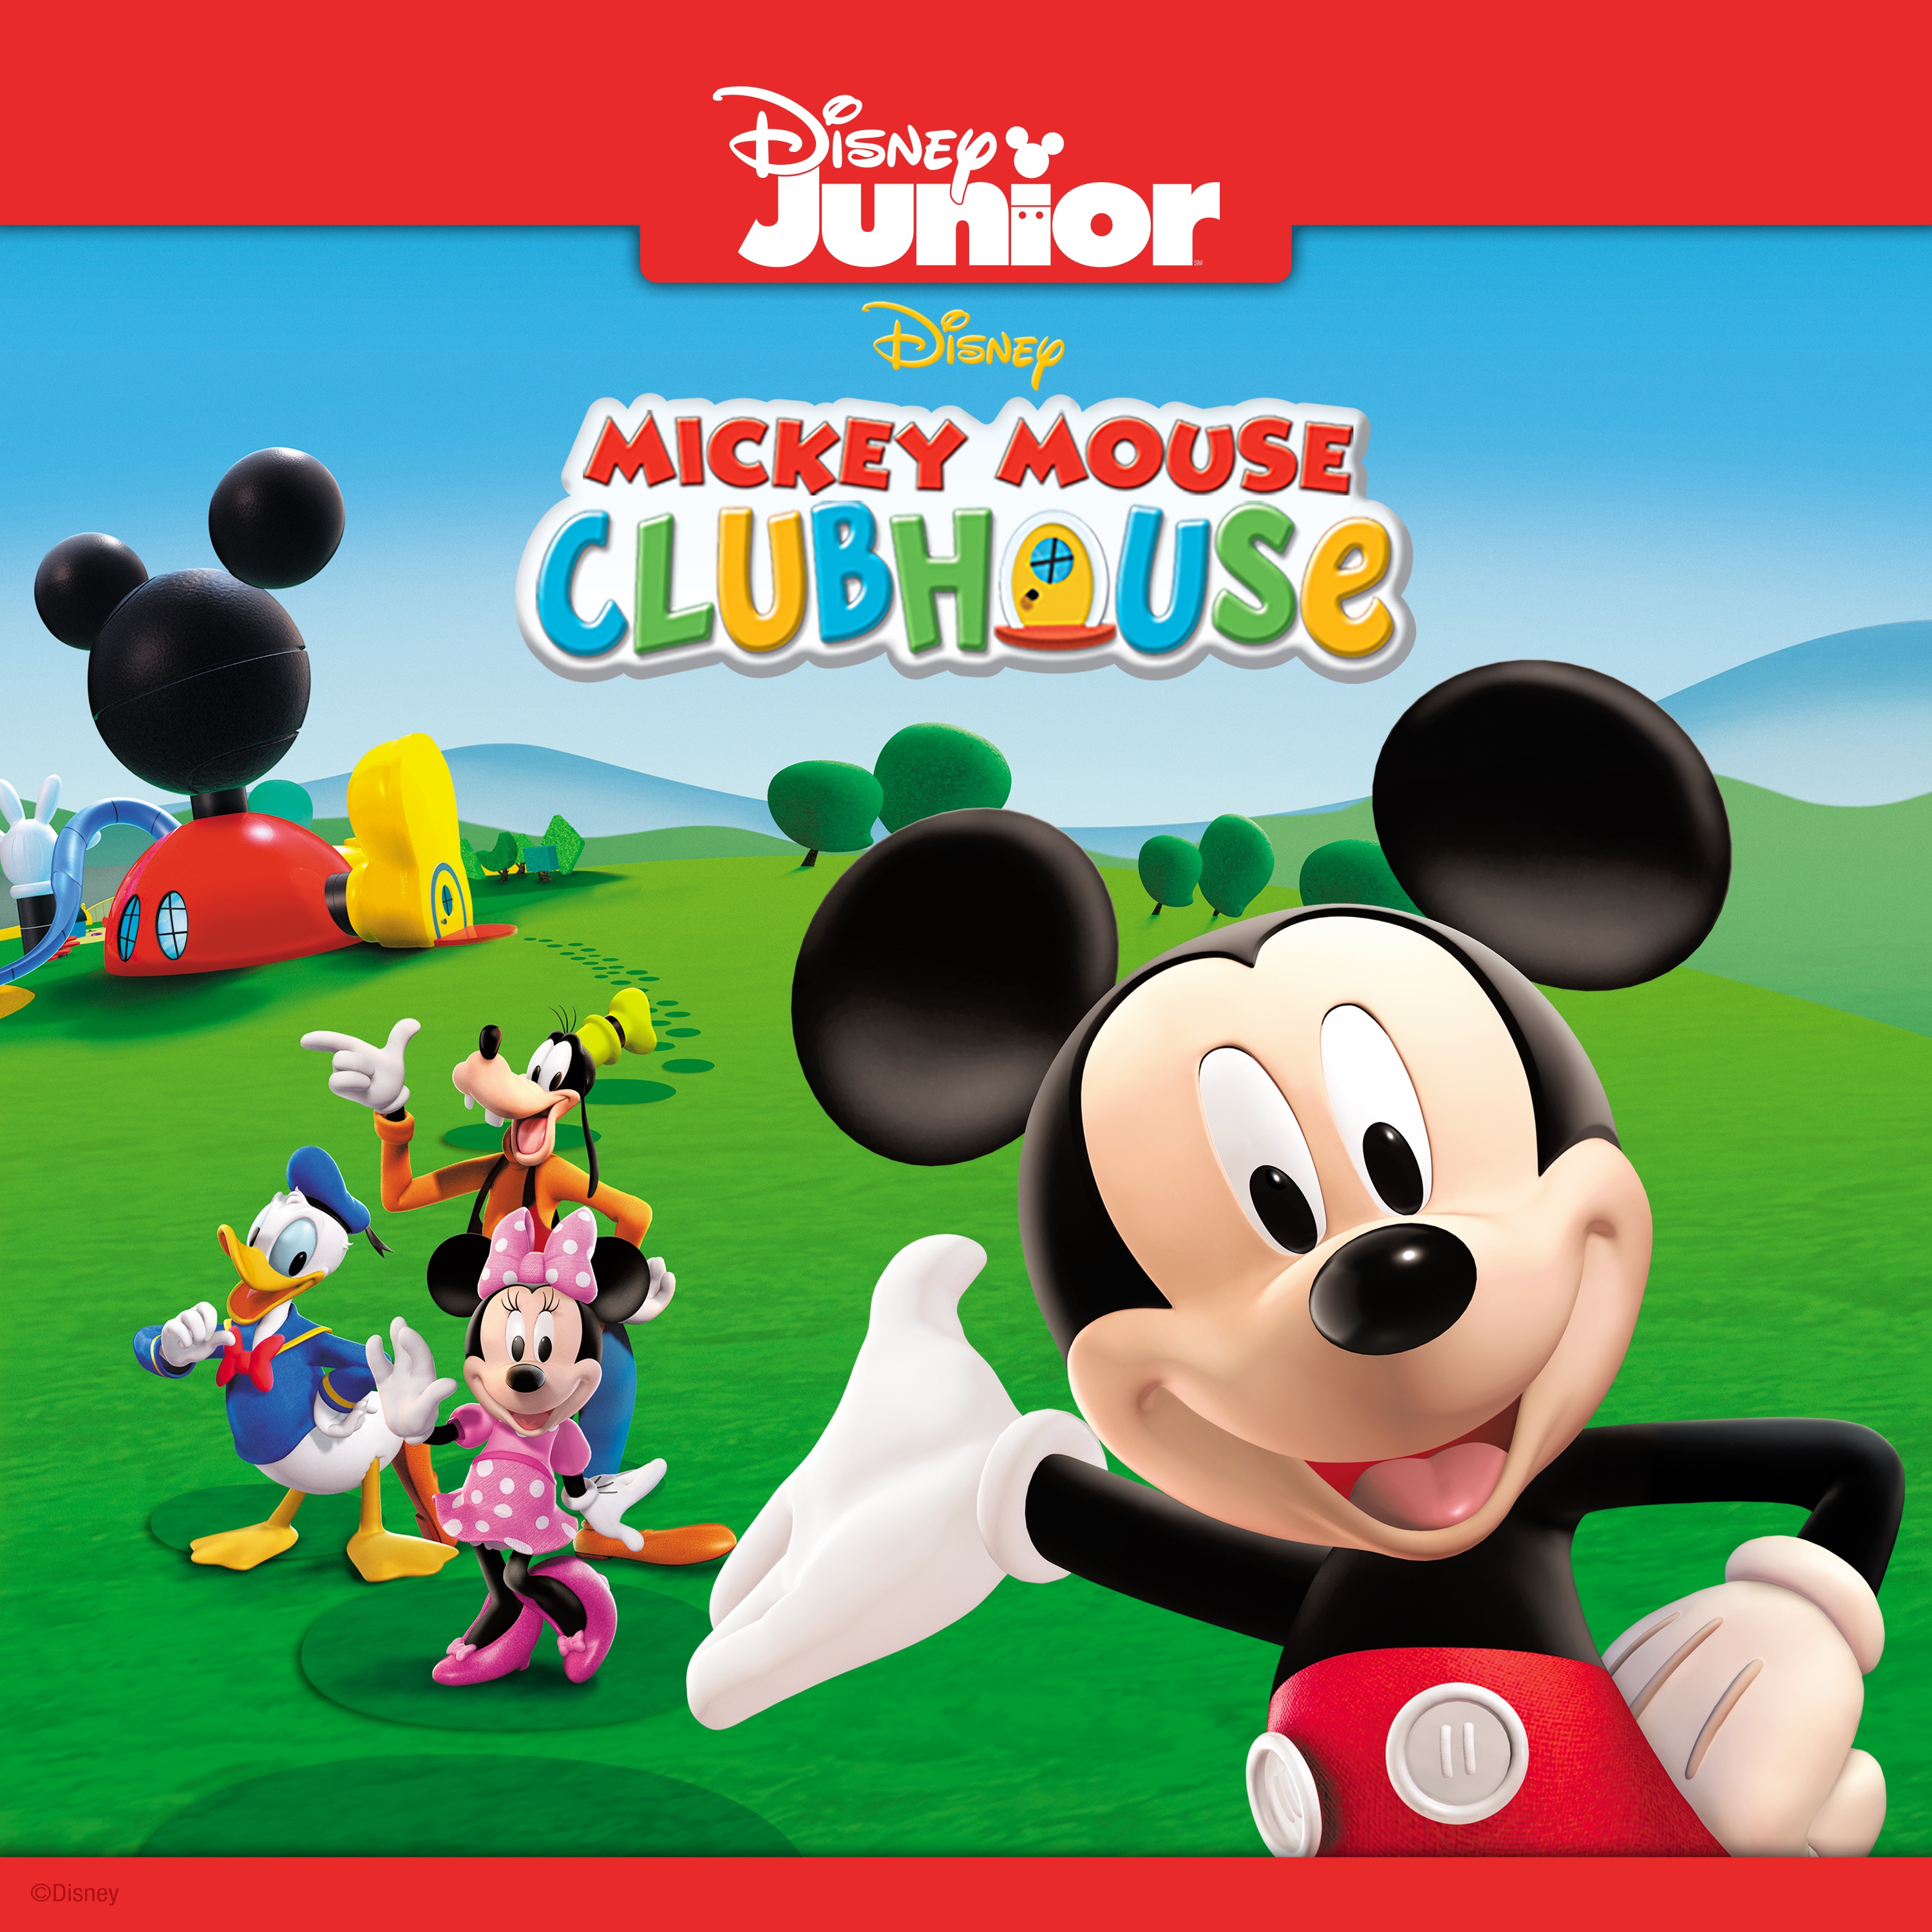 Mickey Mouse Clubhouse Season 2